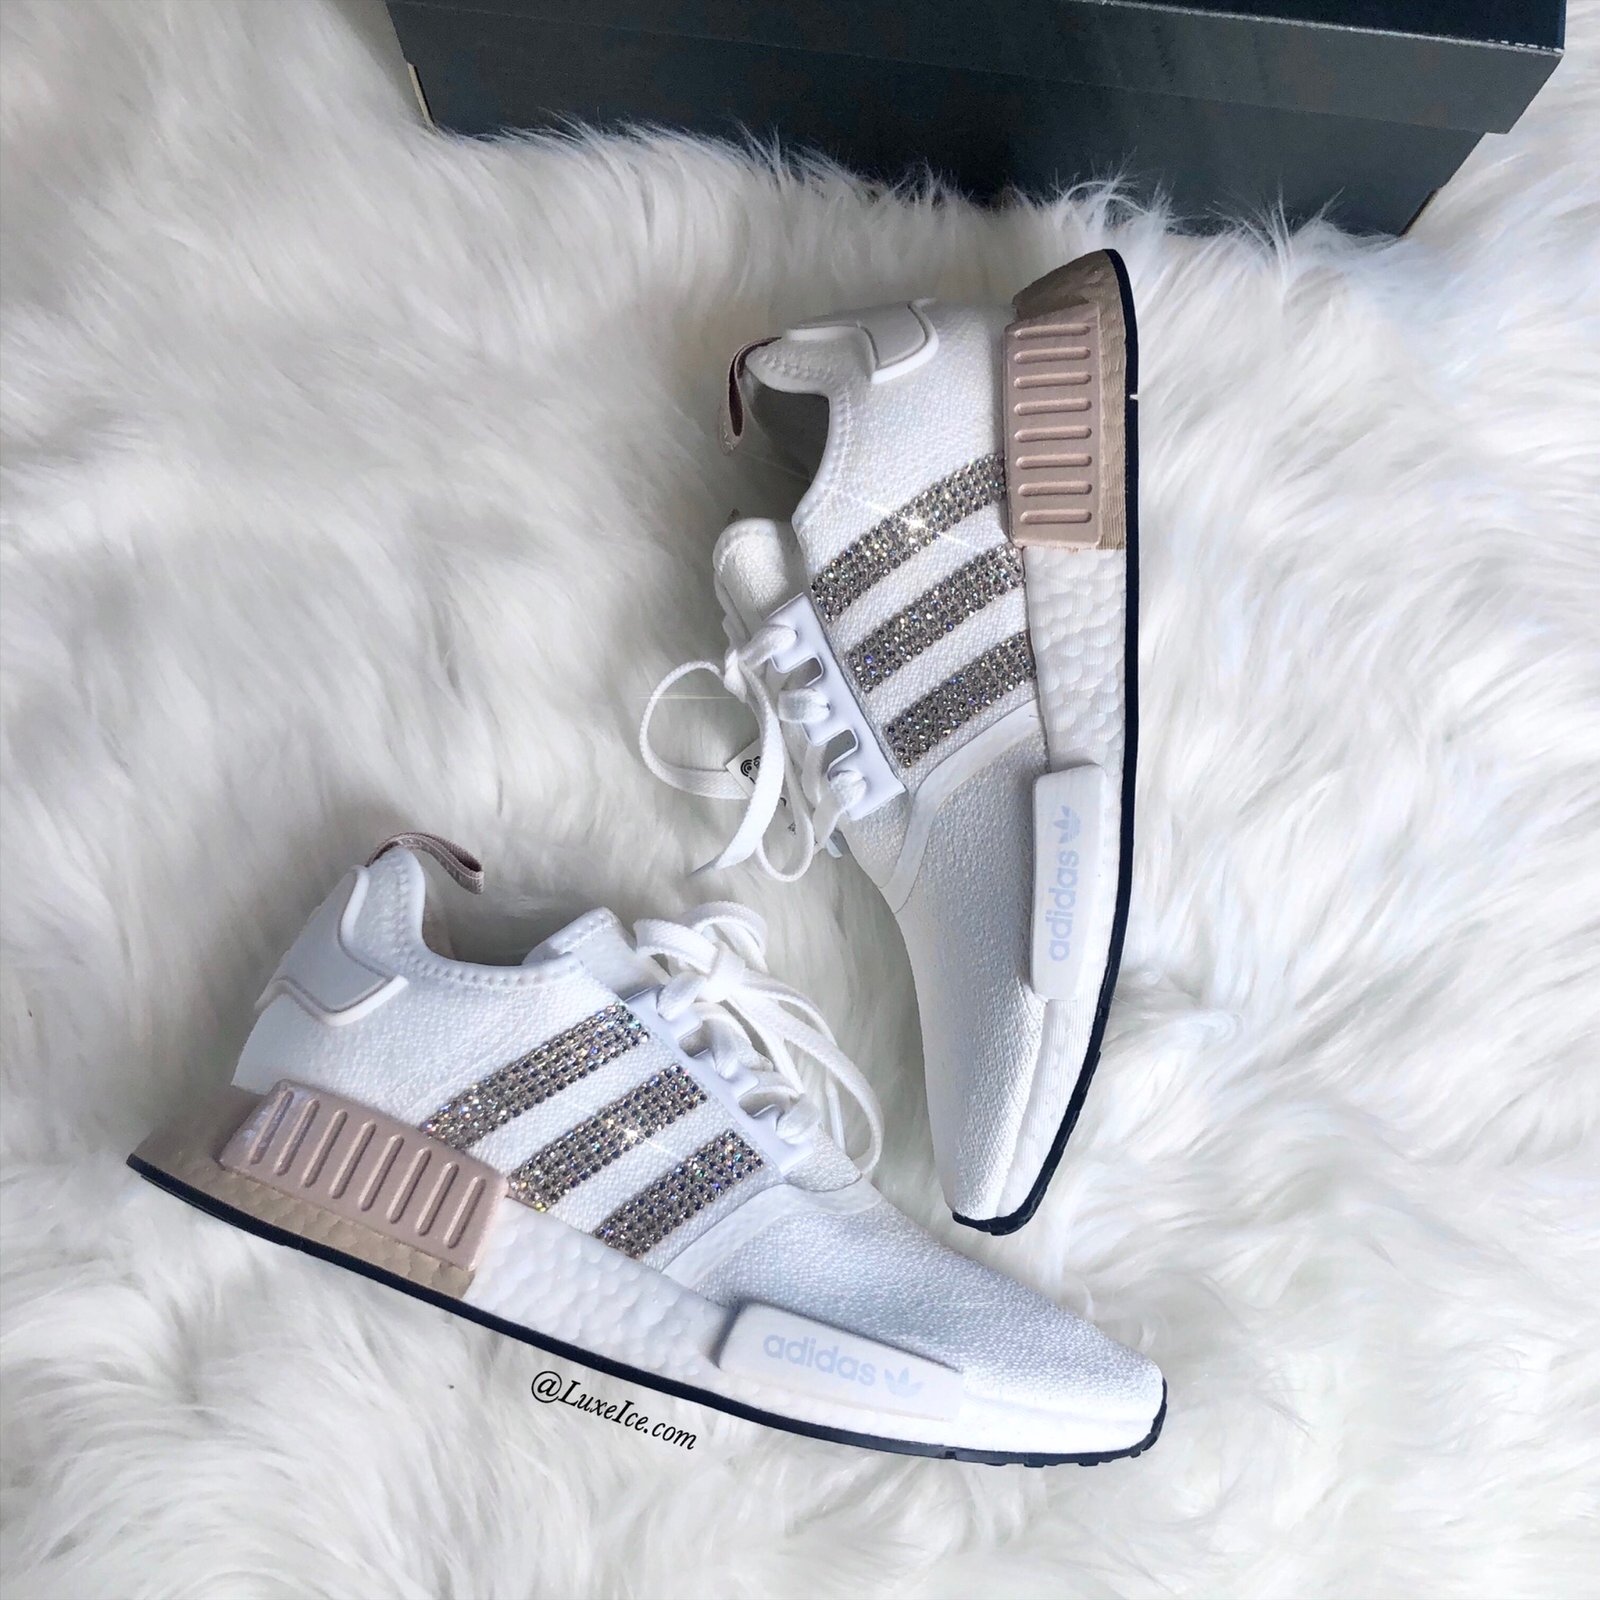 adidas nmd runner casual shoes